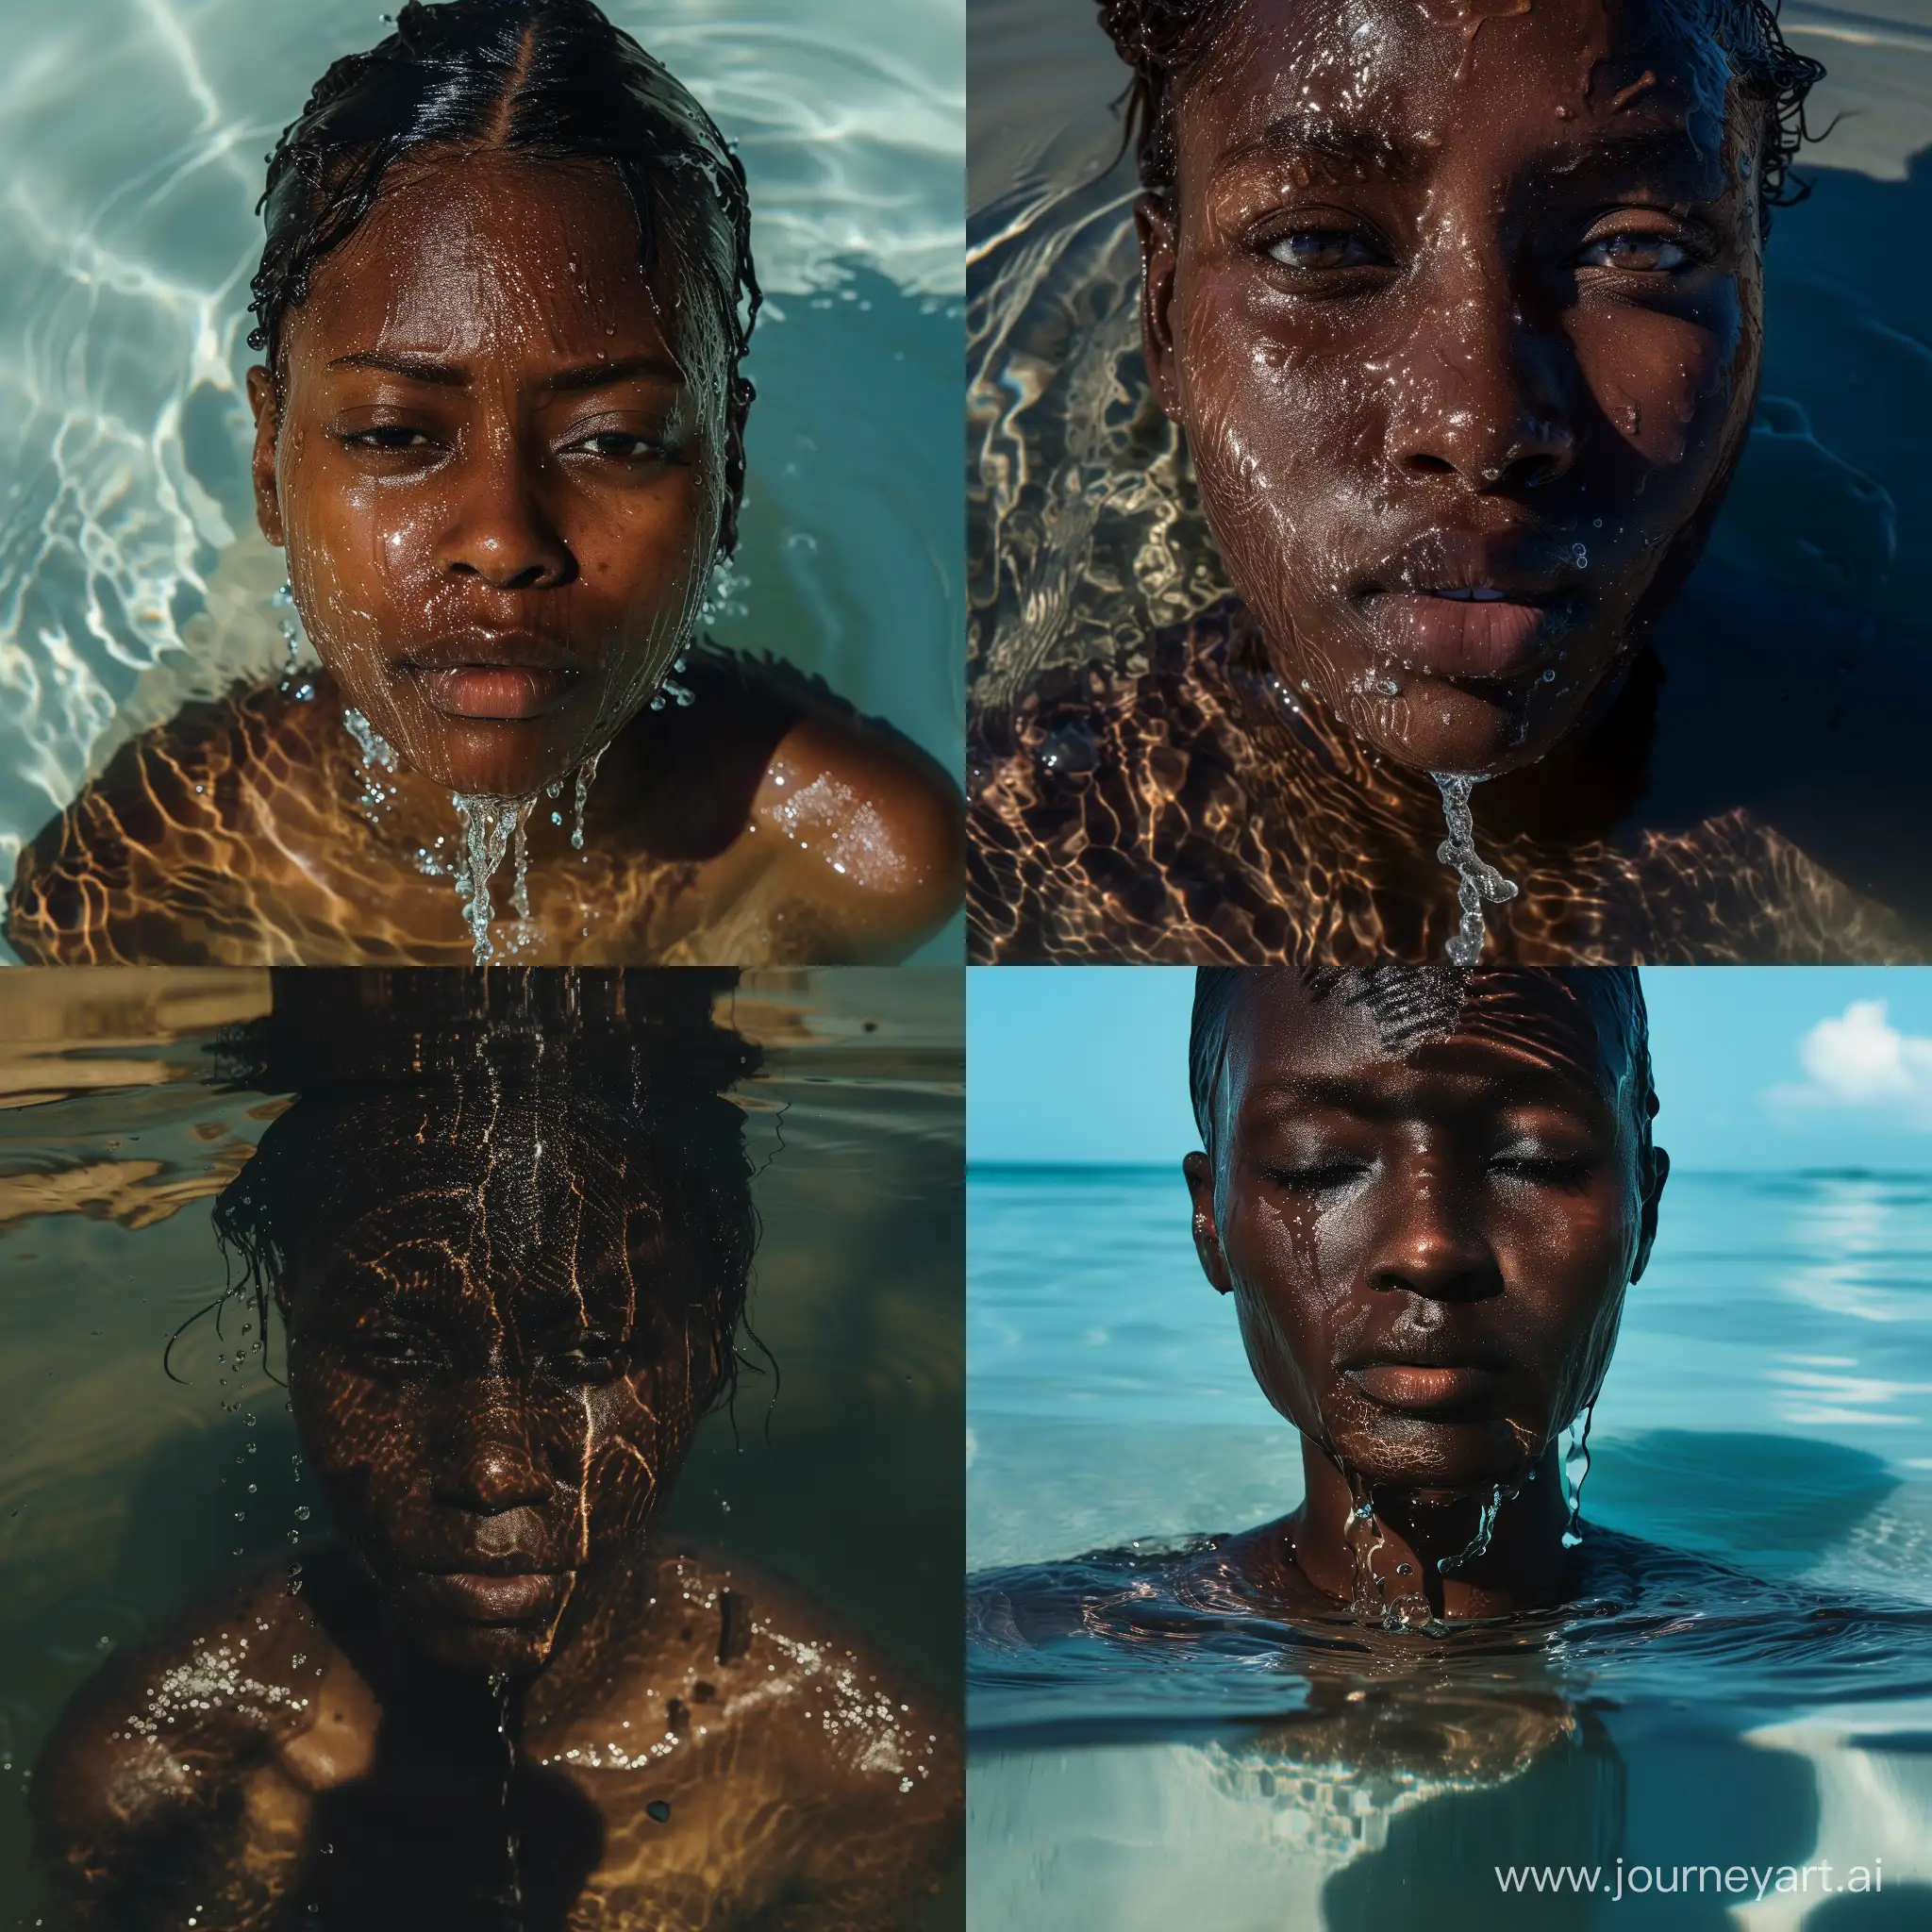 Front view photo of African woman emerging from the water on a sunny day. Her face neck and shoulders are wet with water flowing down. There’s a reflection of her shadow on the water. The water is at her waist level